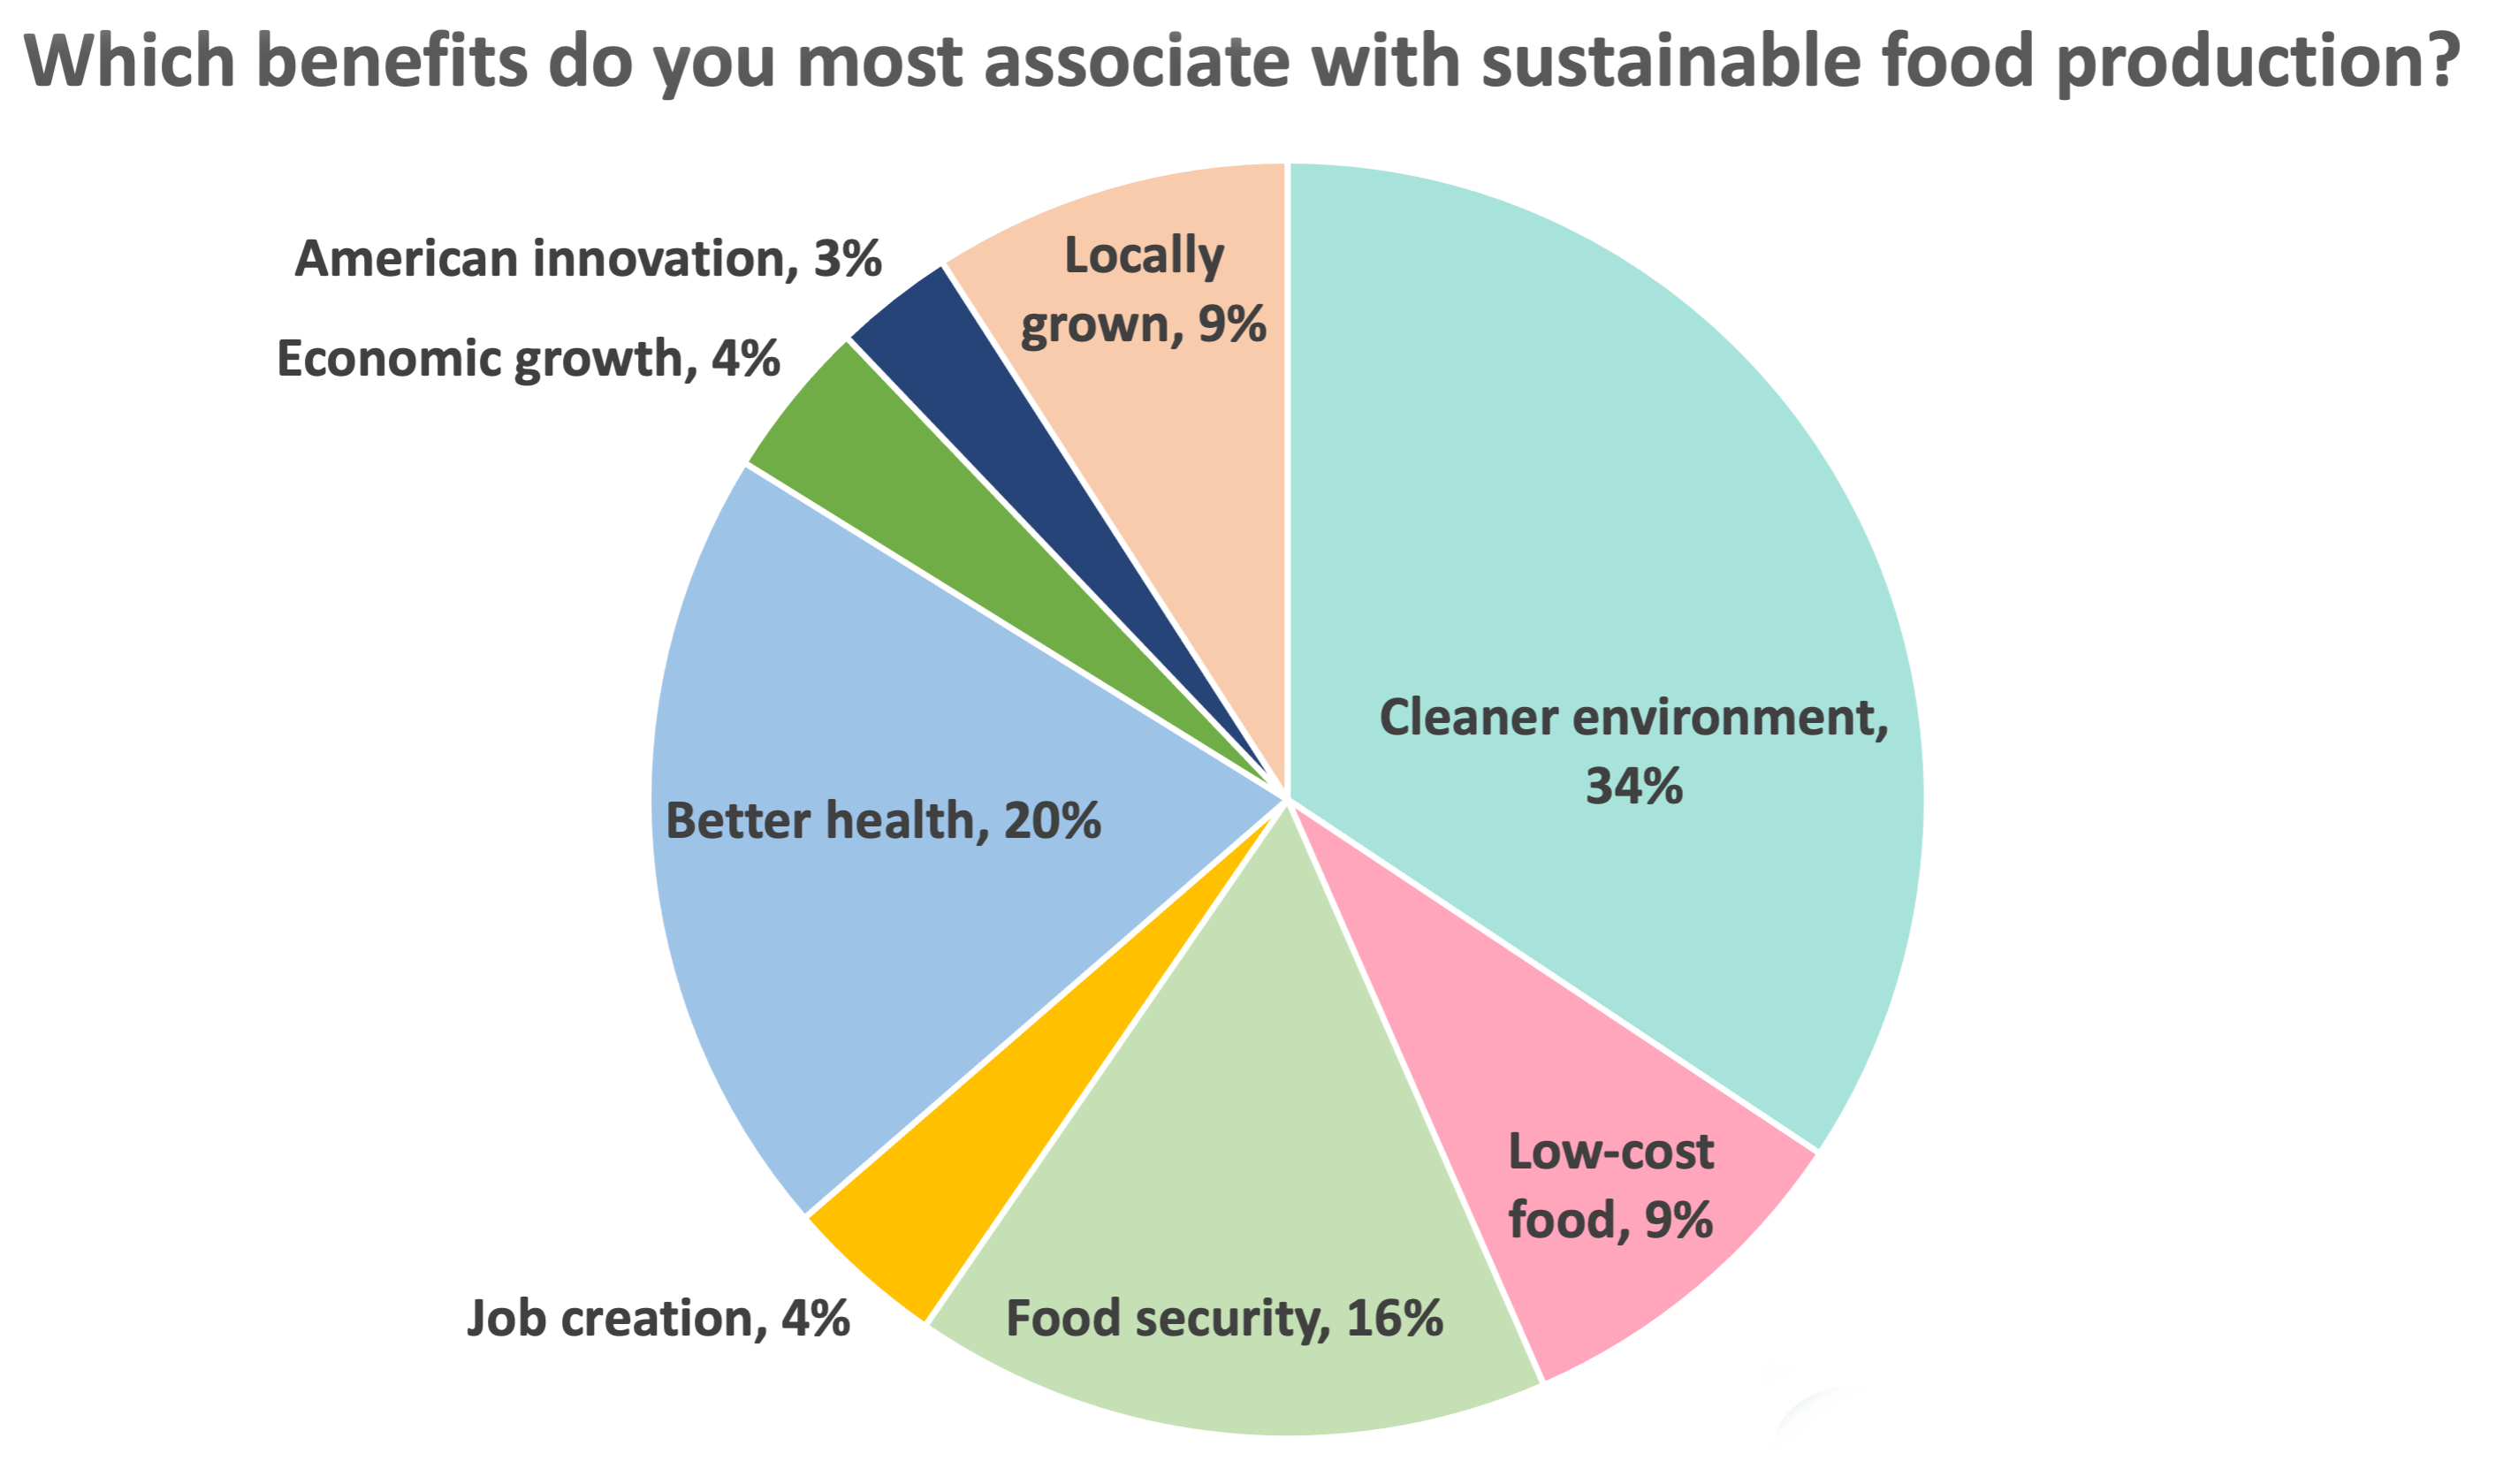 This chart shows which benefits people associate with sustainable food production. 34% said cleaner environment. 20% said better health. 16% said food security. 9% said low-cost food. 9% said locally grown. 4% said economic growth. 4% said job creation. Finally, 3% said American innovation.